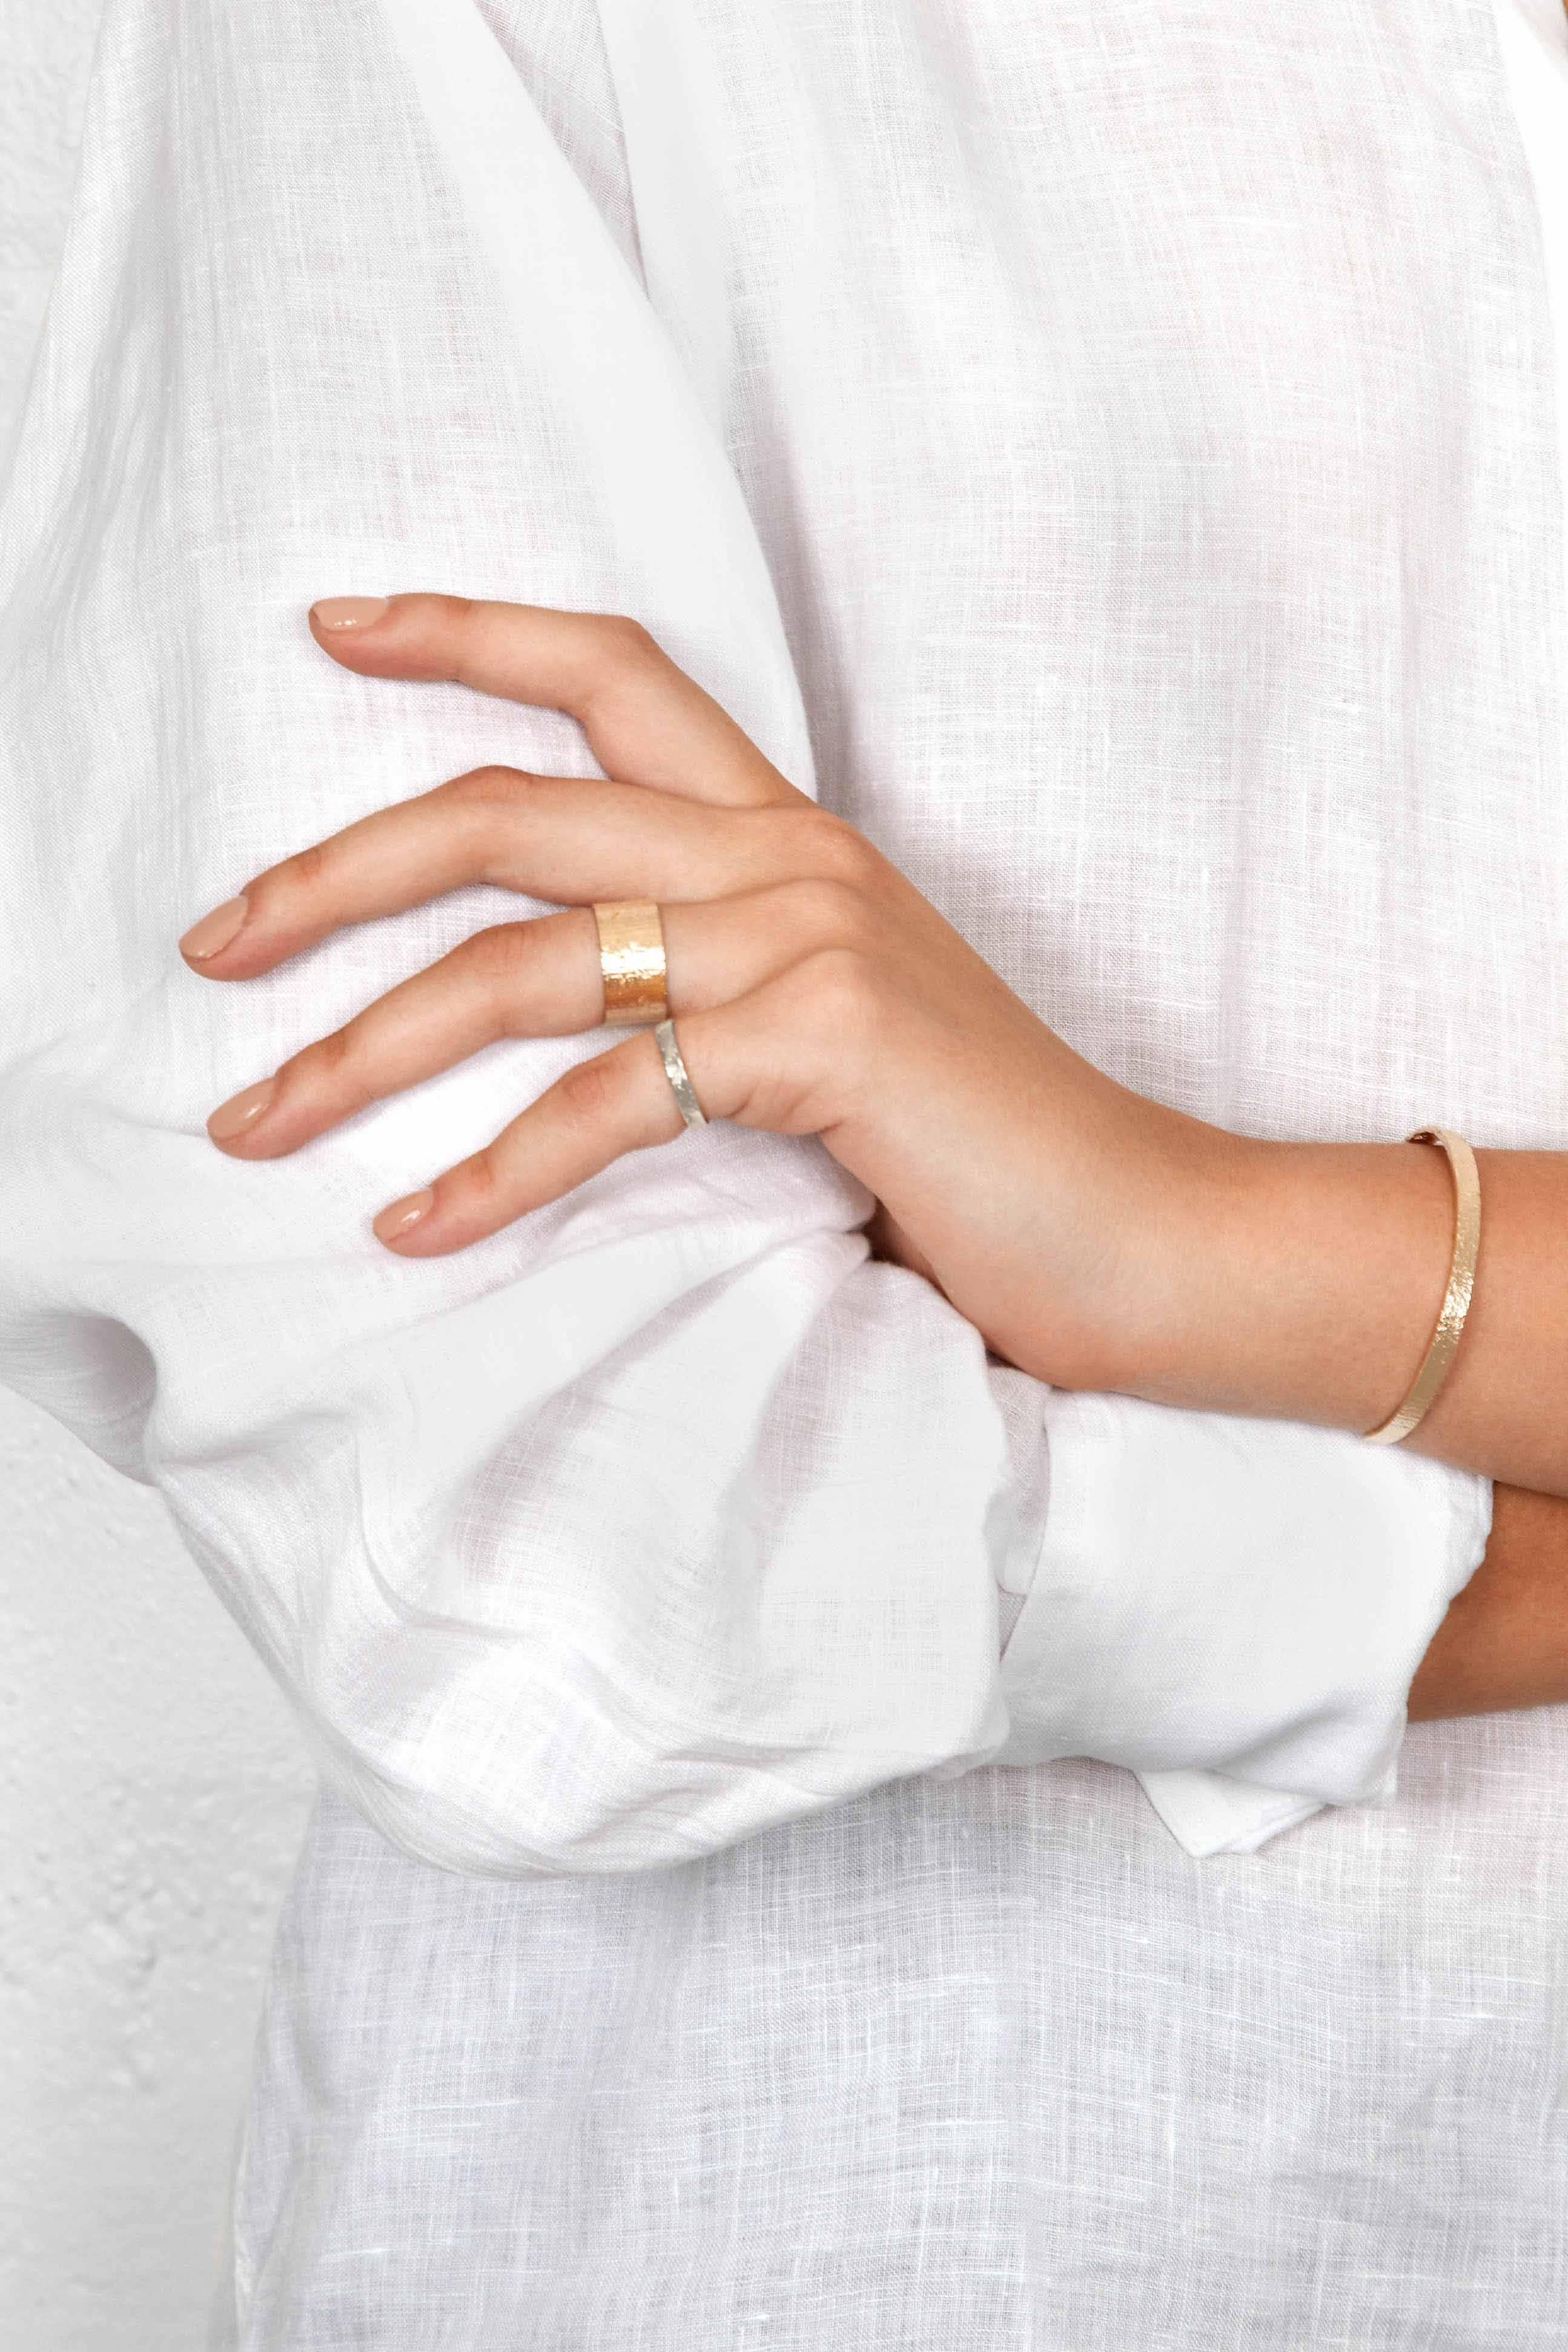 This classic cuff bracelet is handcrafted in solid 18-carat gold with a shimmering rustic texture.

Every piece in this collection is individually hand-crafted in paper and cast directly into precious metal in a unique and innovative process.  Every